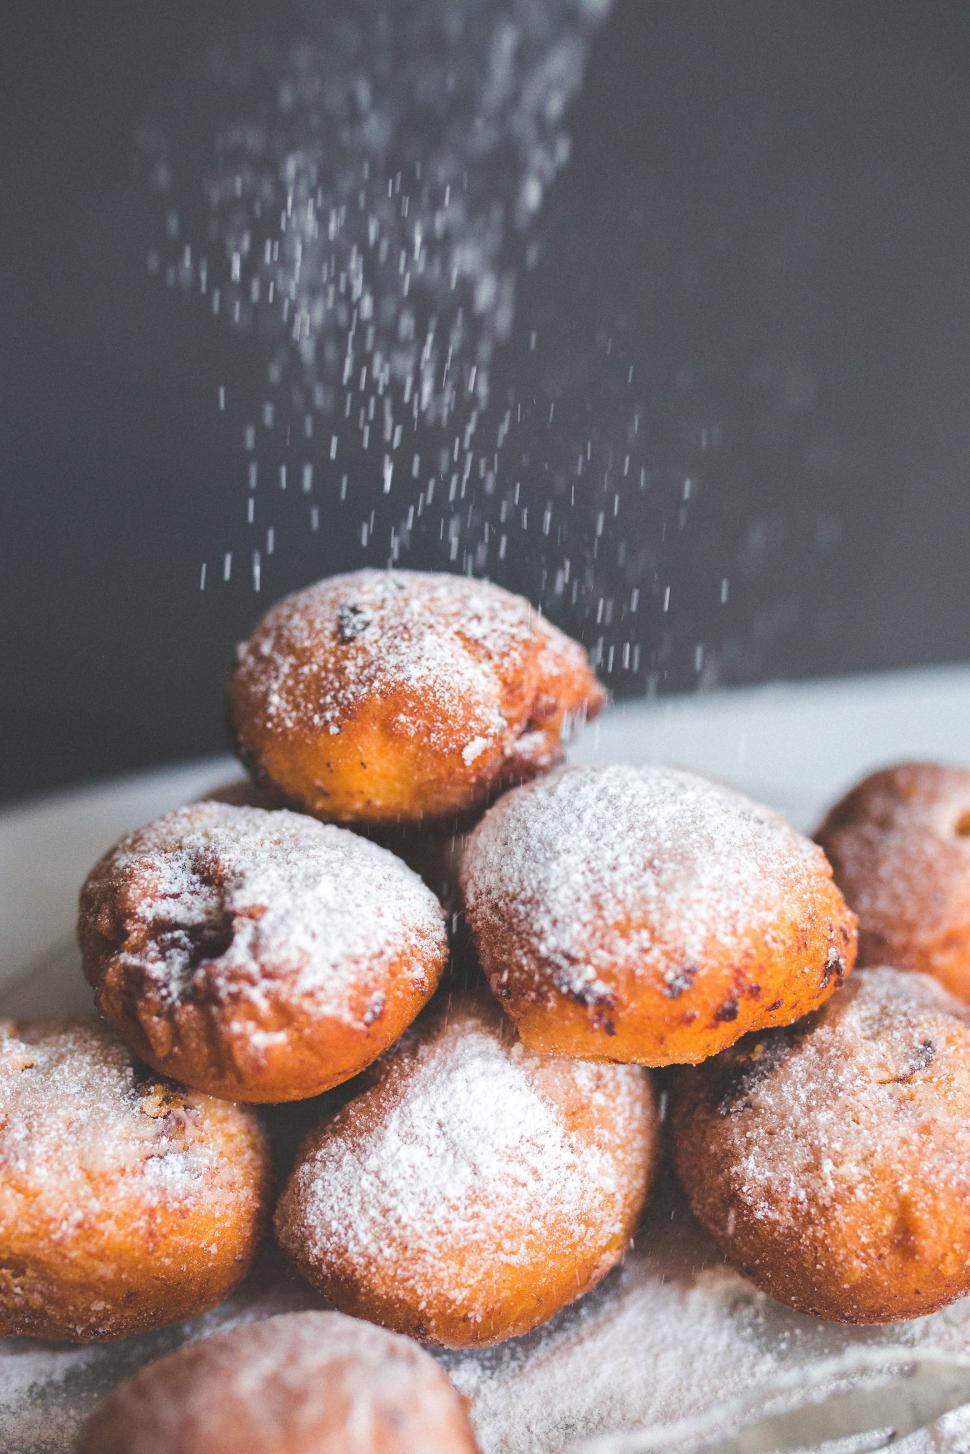 Free Image of Pile of Powdered Sugar Donuts on White Plate 